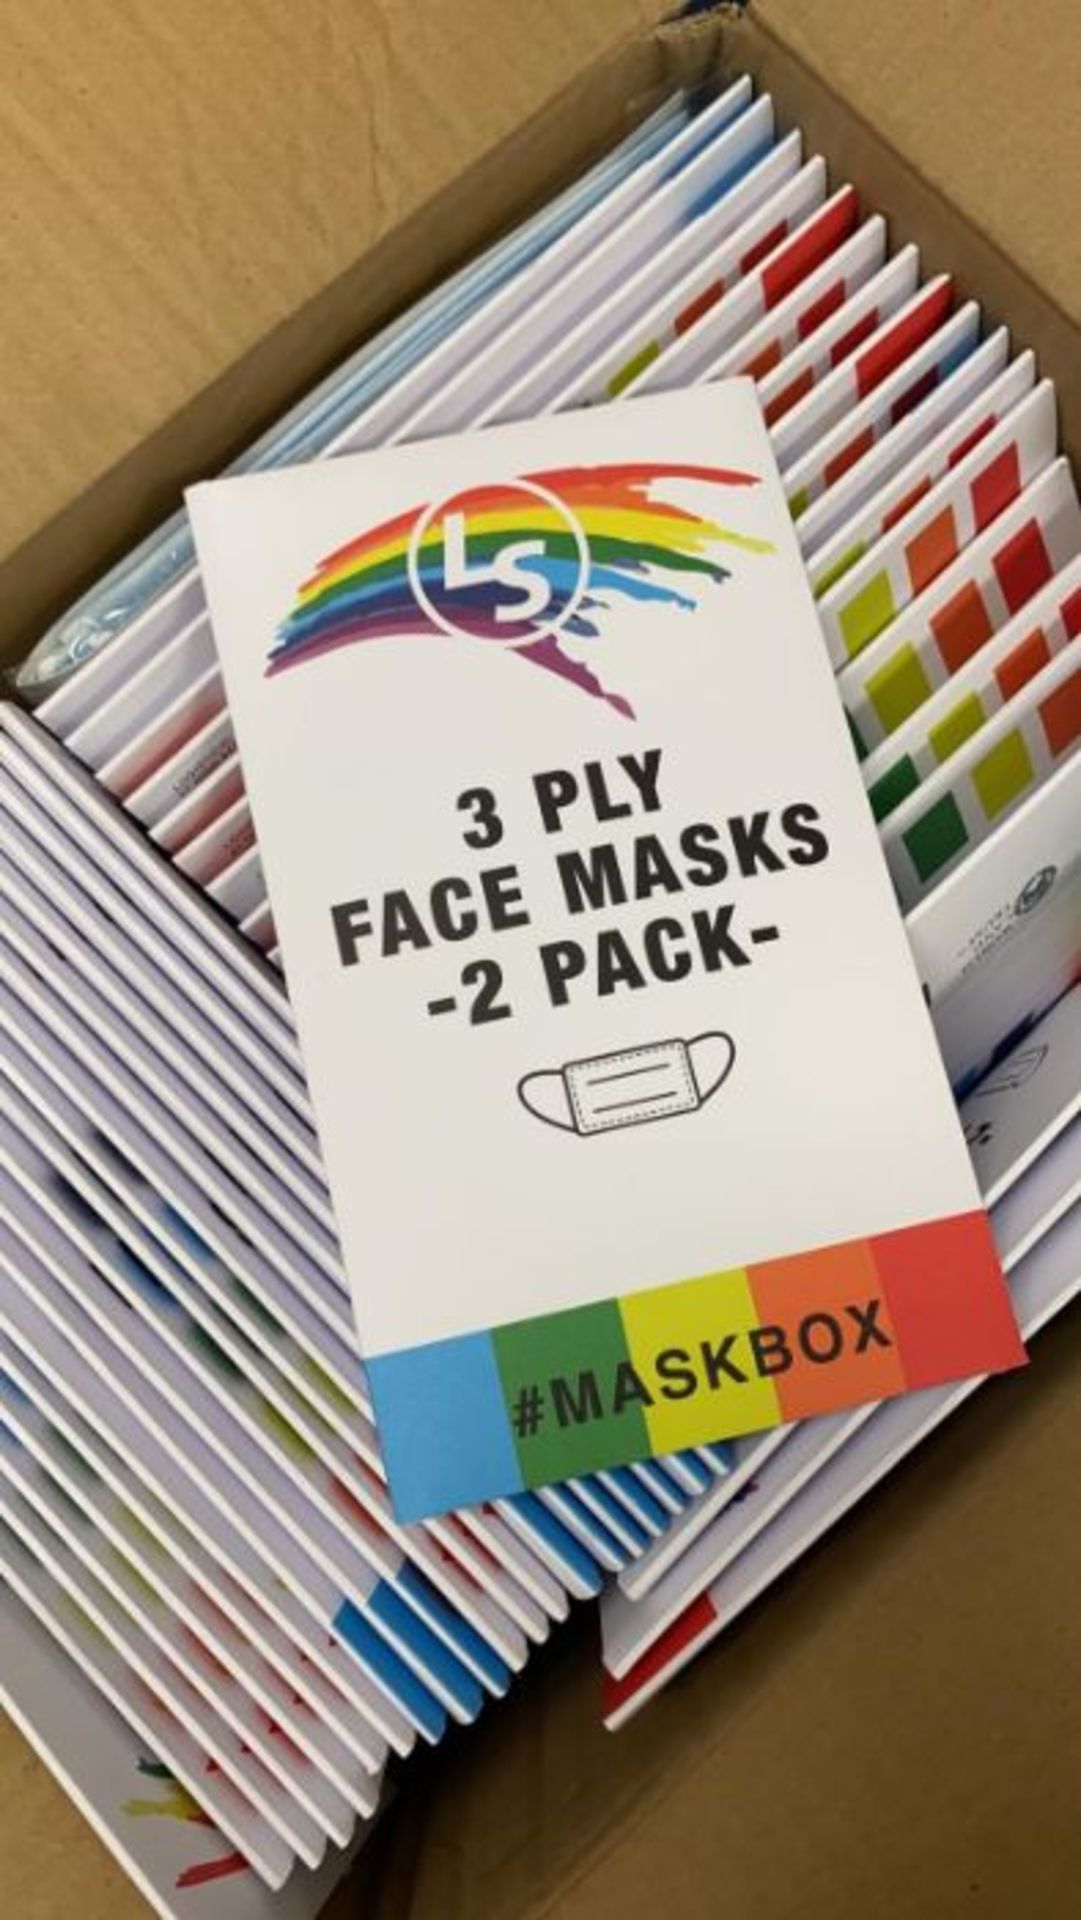 Maskbox Disposable (3ply Face Mask) - 2pk (Quantity 6825). Uses 3 layers of non-woven fibre fabric